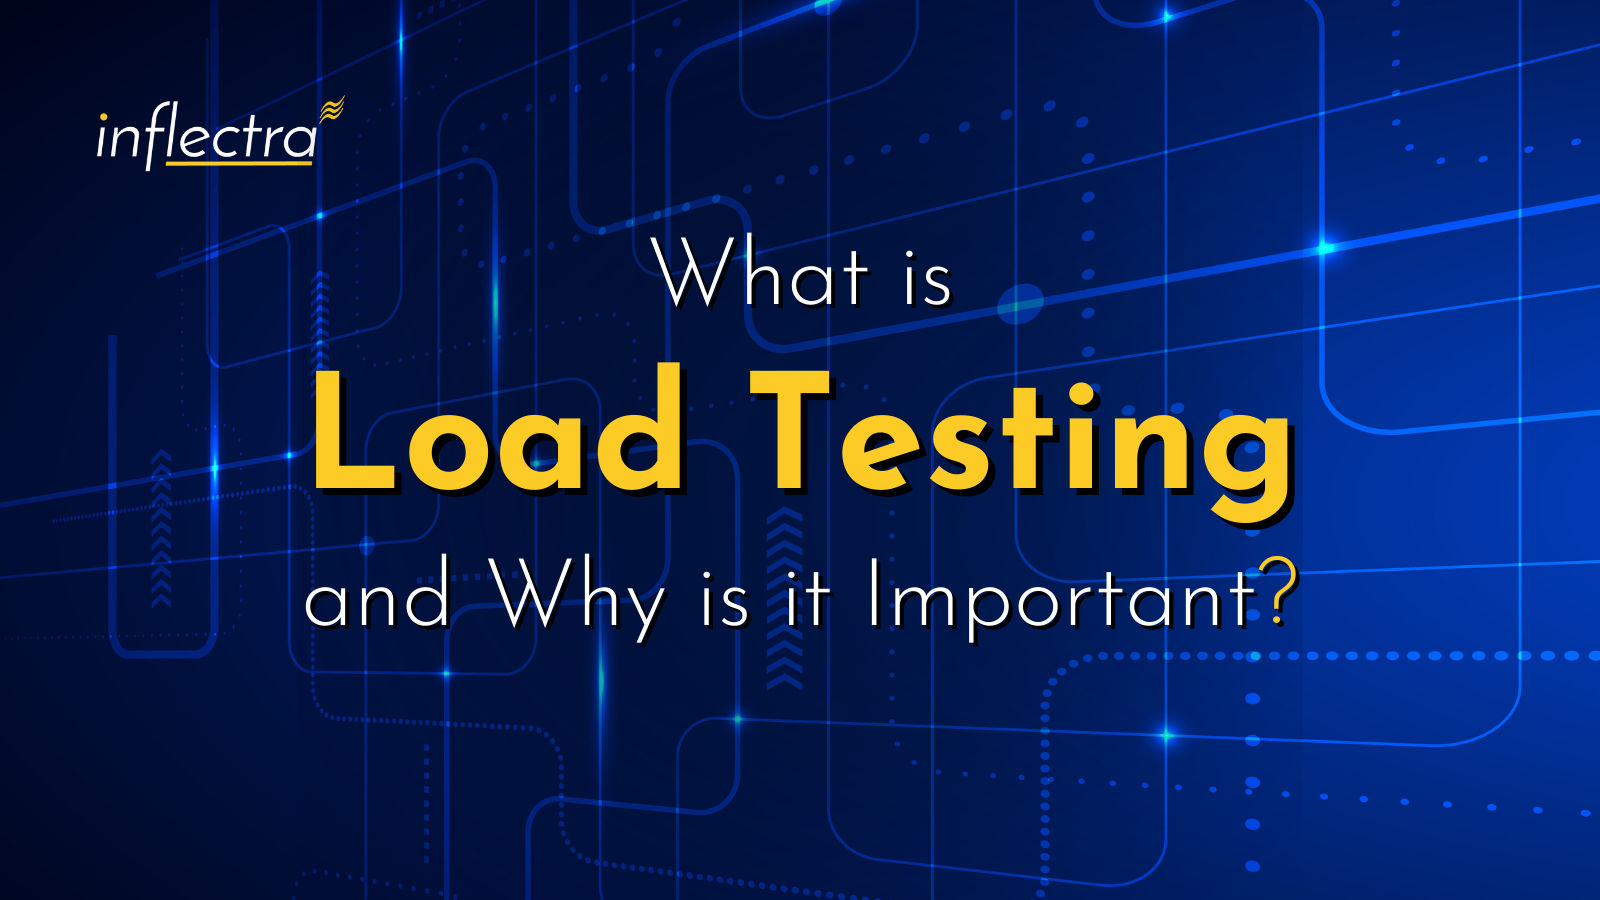 inflectra-blog-what-is-load-testing -and-why-is-it-important-image